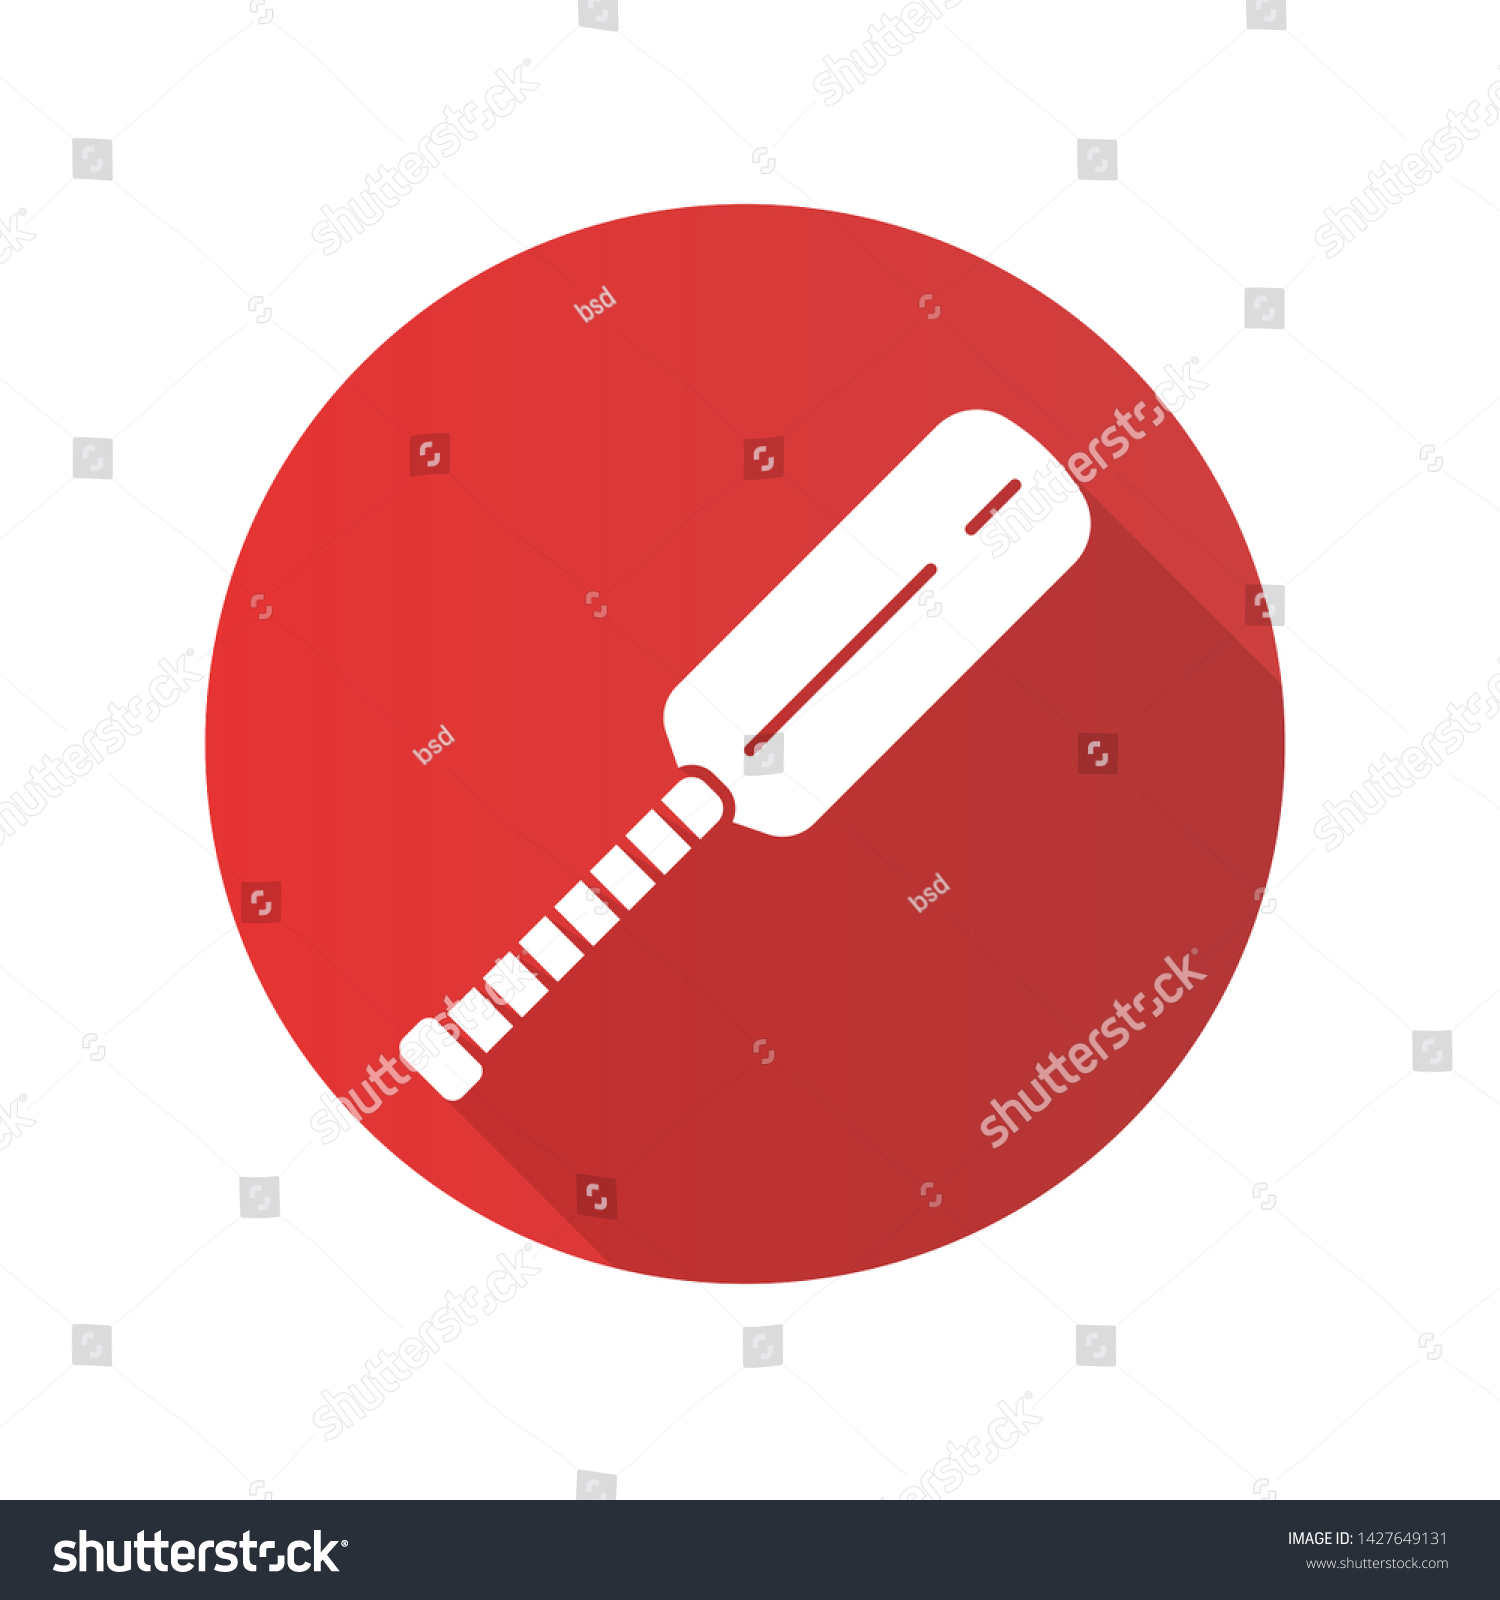 SVG of Cricket bat flat design long shadow glyph icon. Equipment for batsmen. Wooden flat block with long handle. Professional sports accessory. Game gear. International sport. Vector silhouette illustration svg